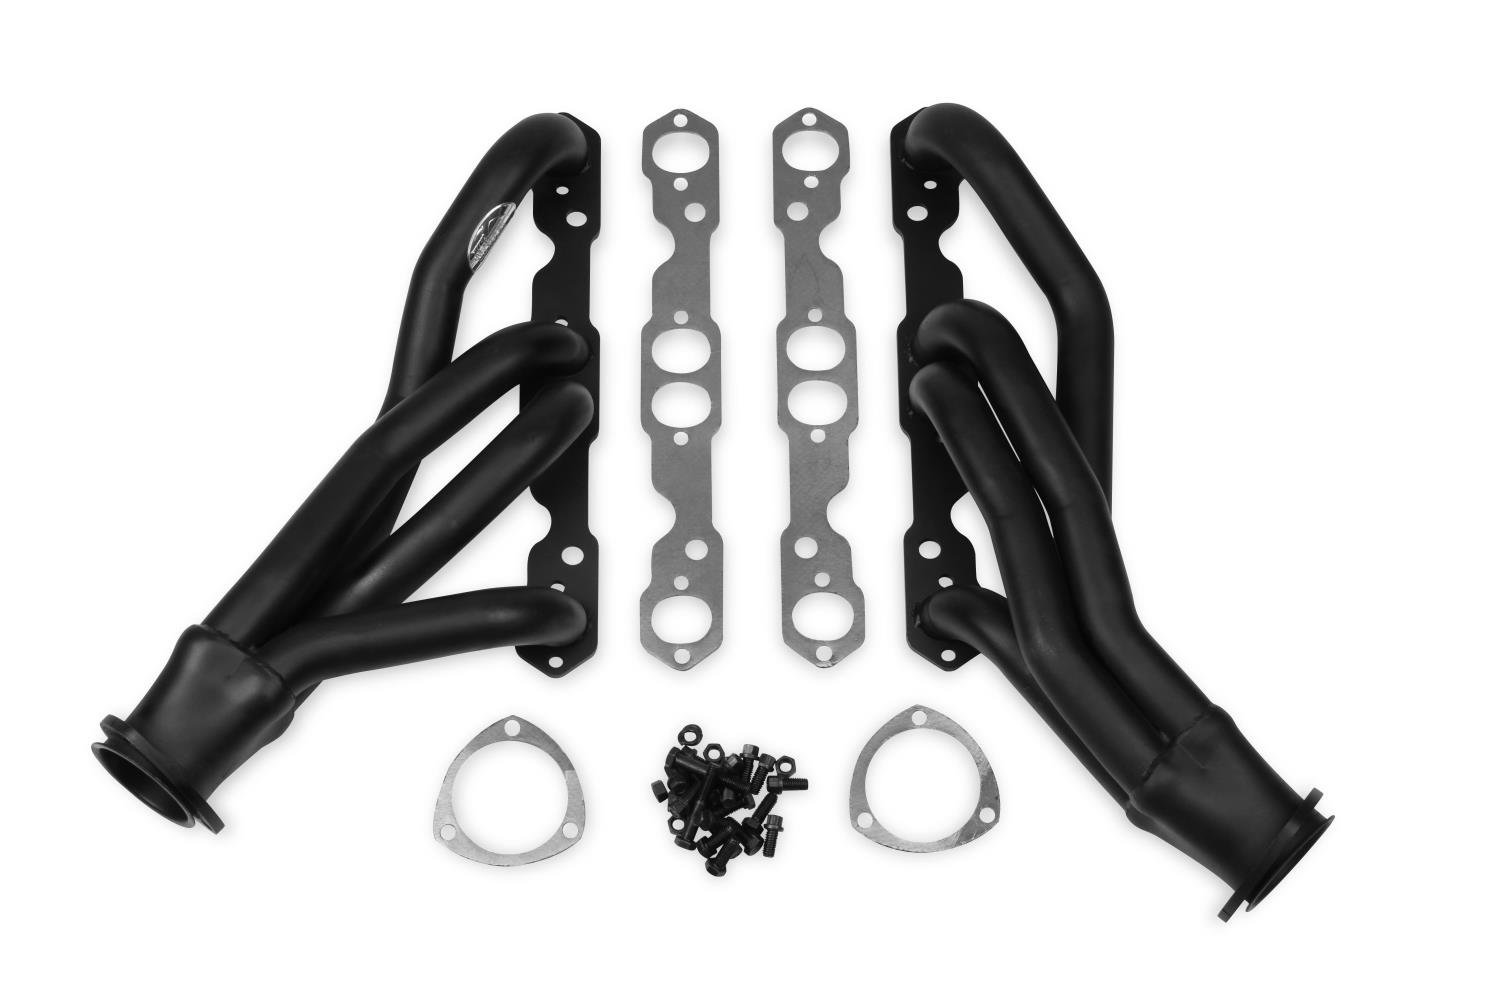 Competition Shorty Headers 265-400 Chevy Small Block V8